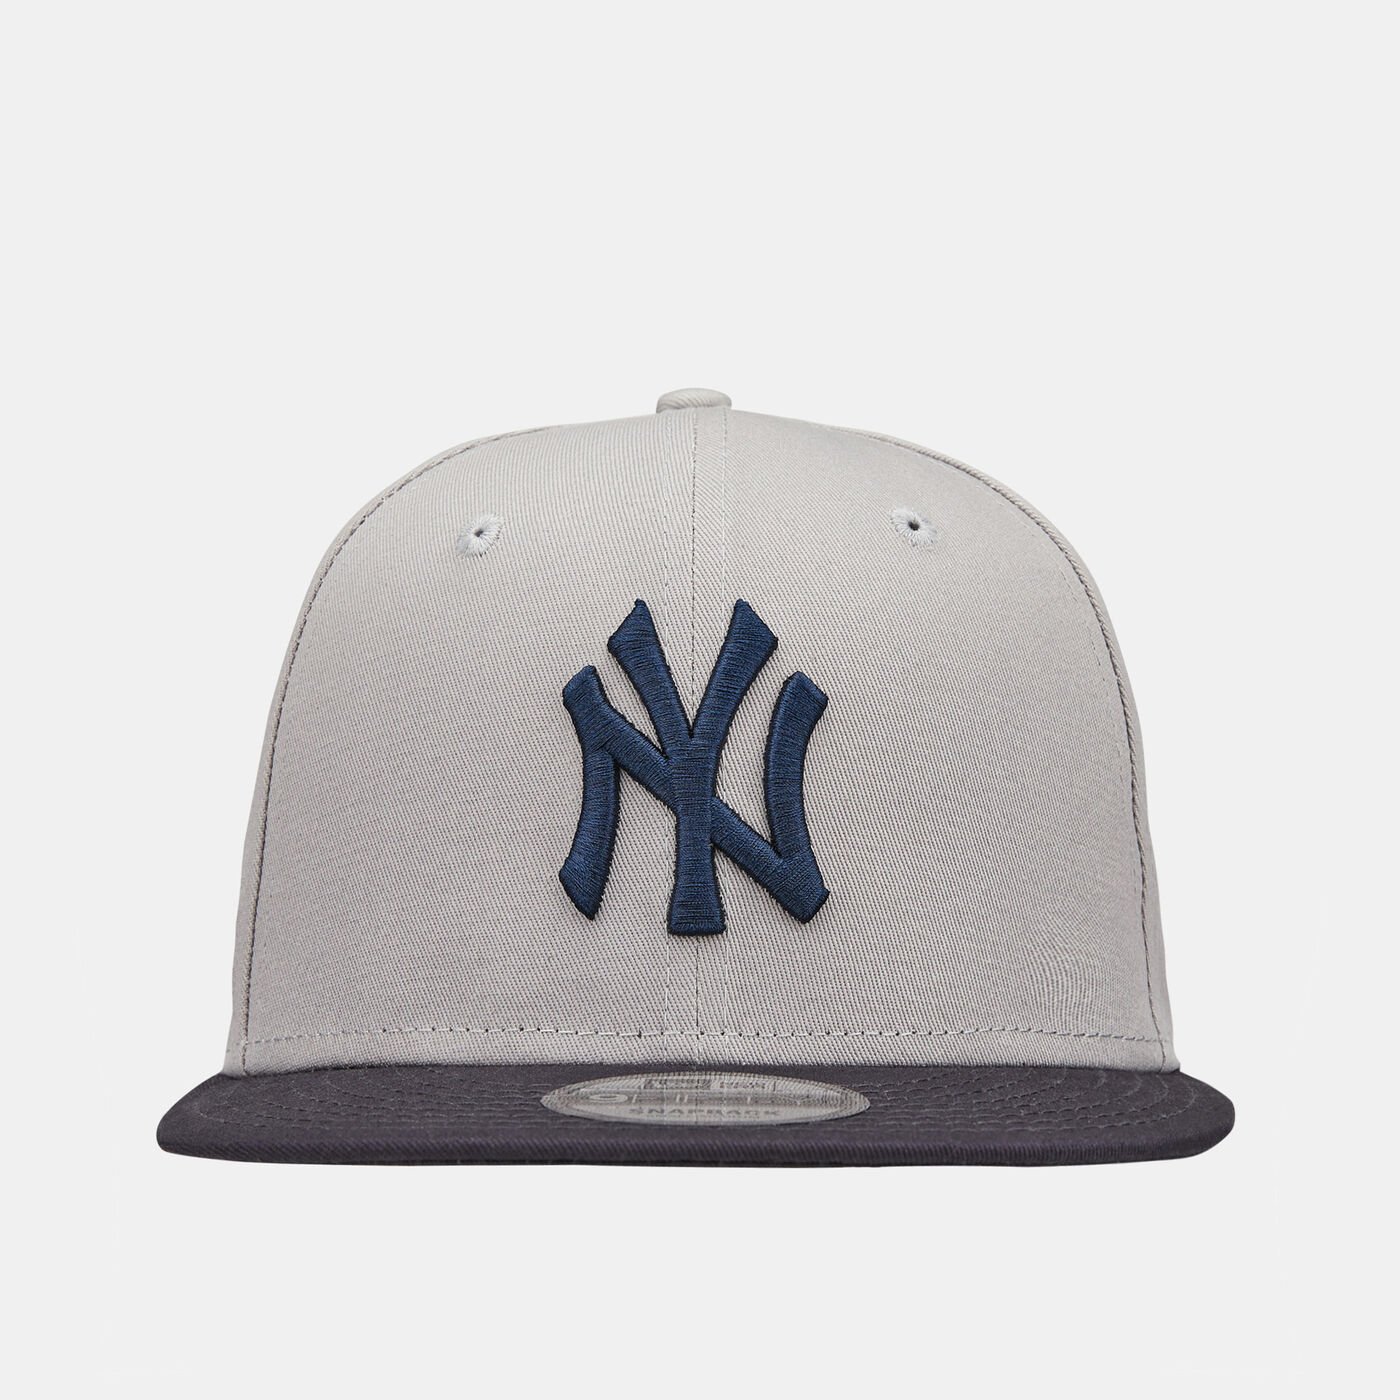 Men's New York Yankees Side Patch 9FIFTY Cap